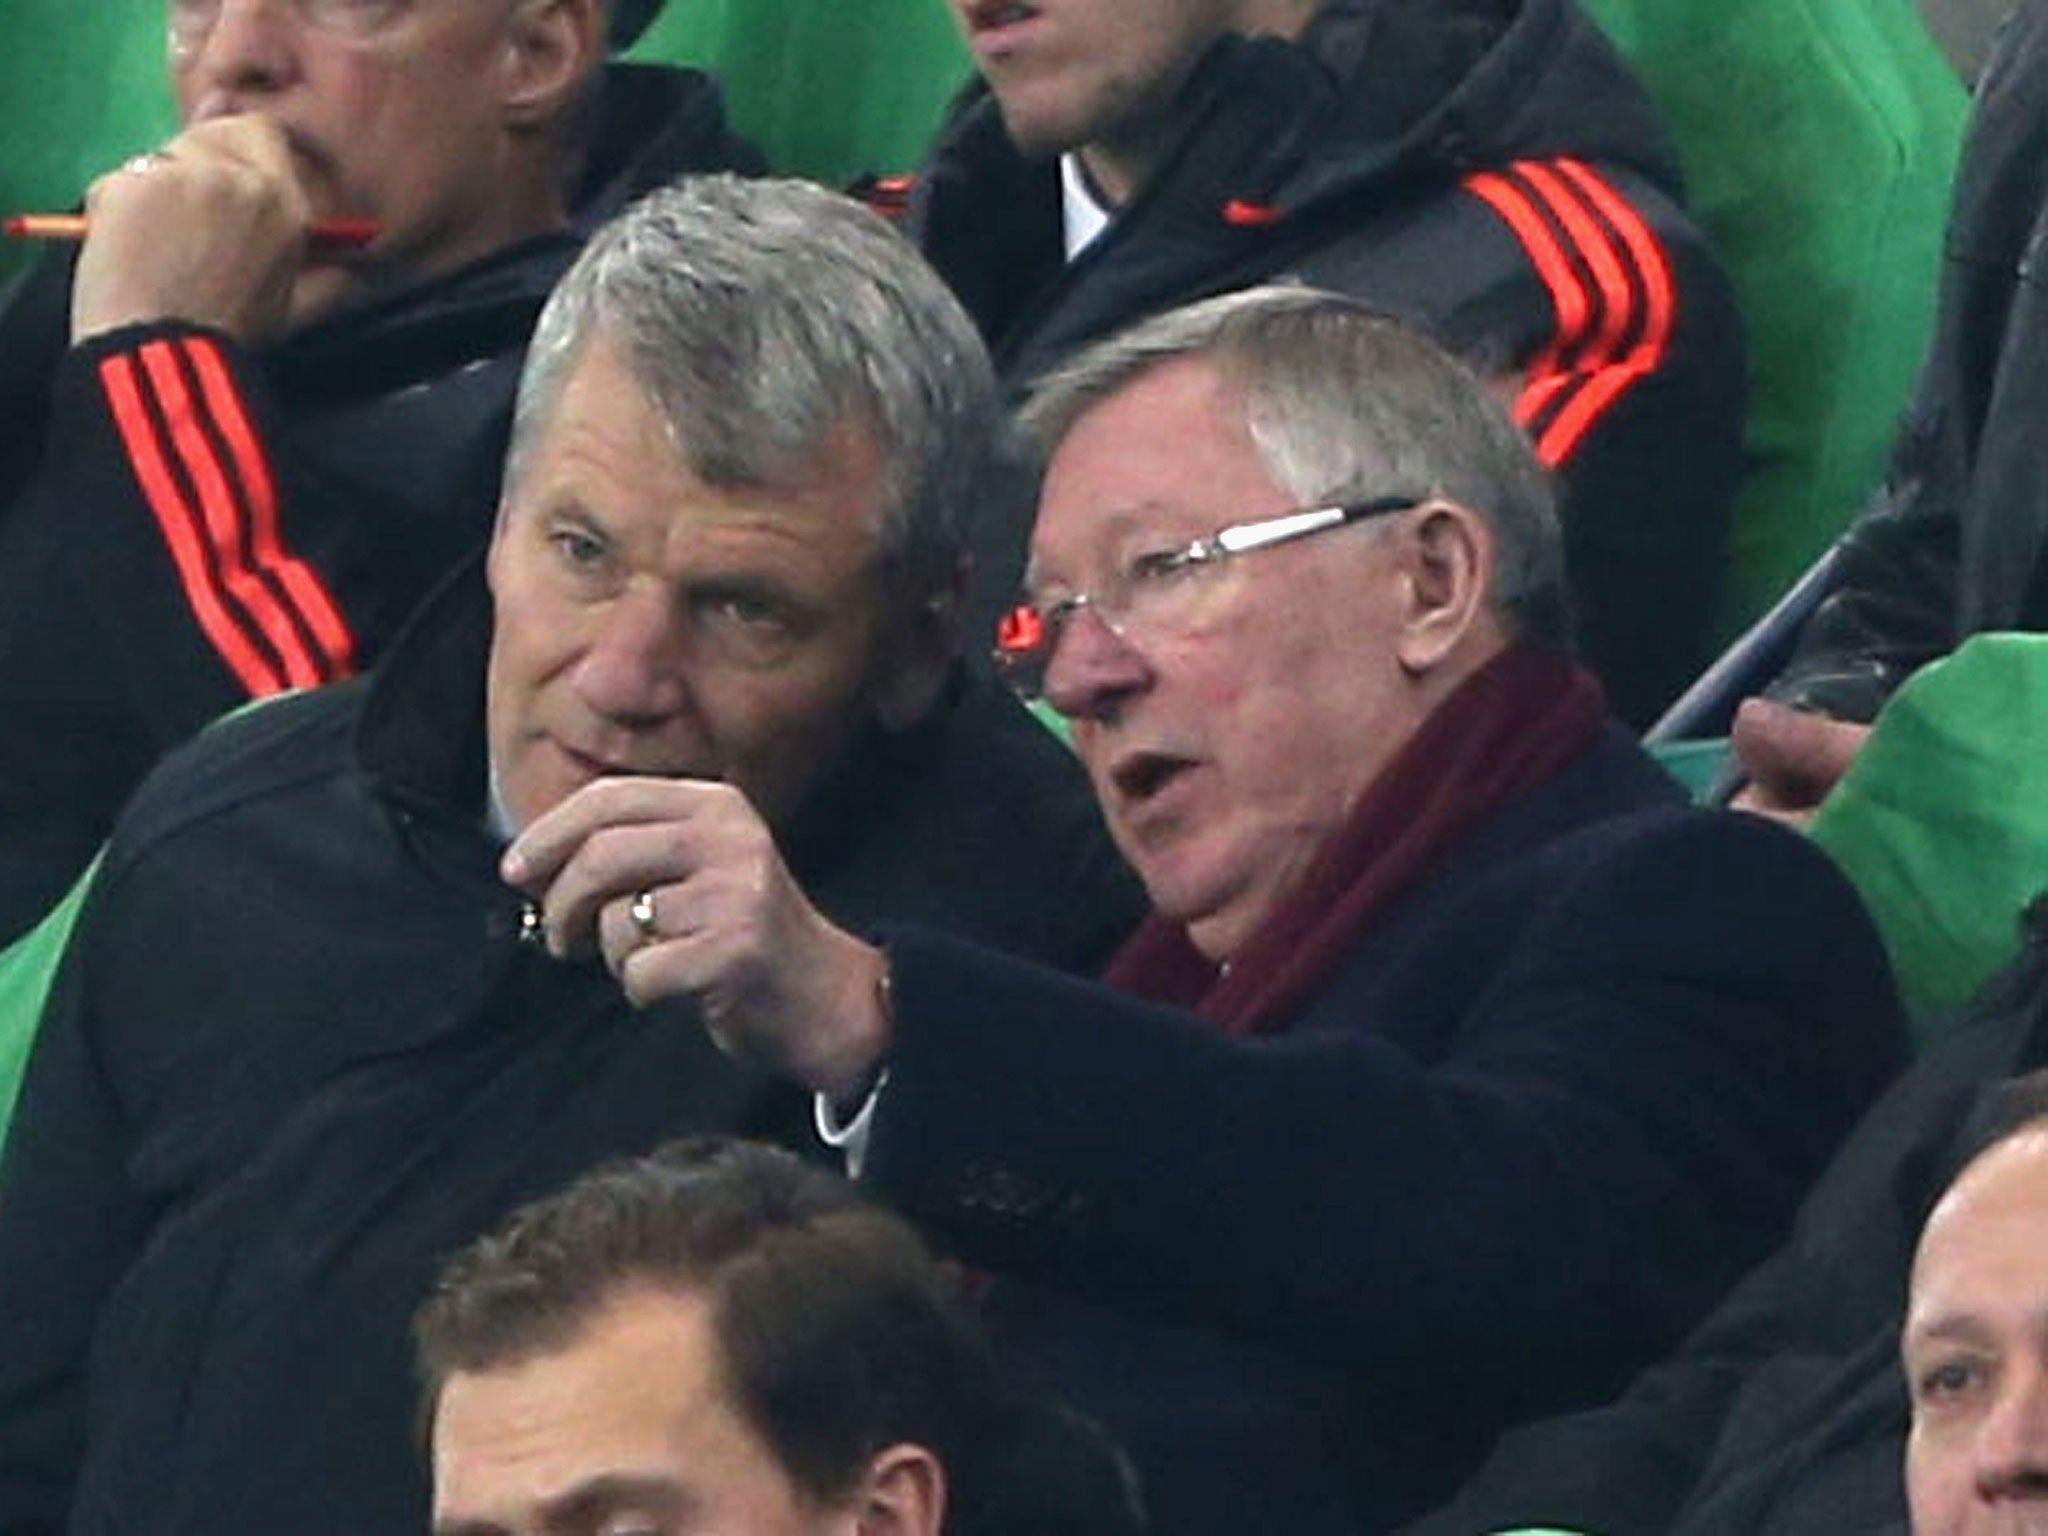 Former Chief Executive David Gill and former manager Sir Alex Ferguson of Manchester United watch from the directors' box